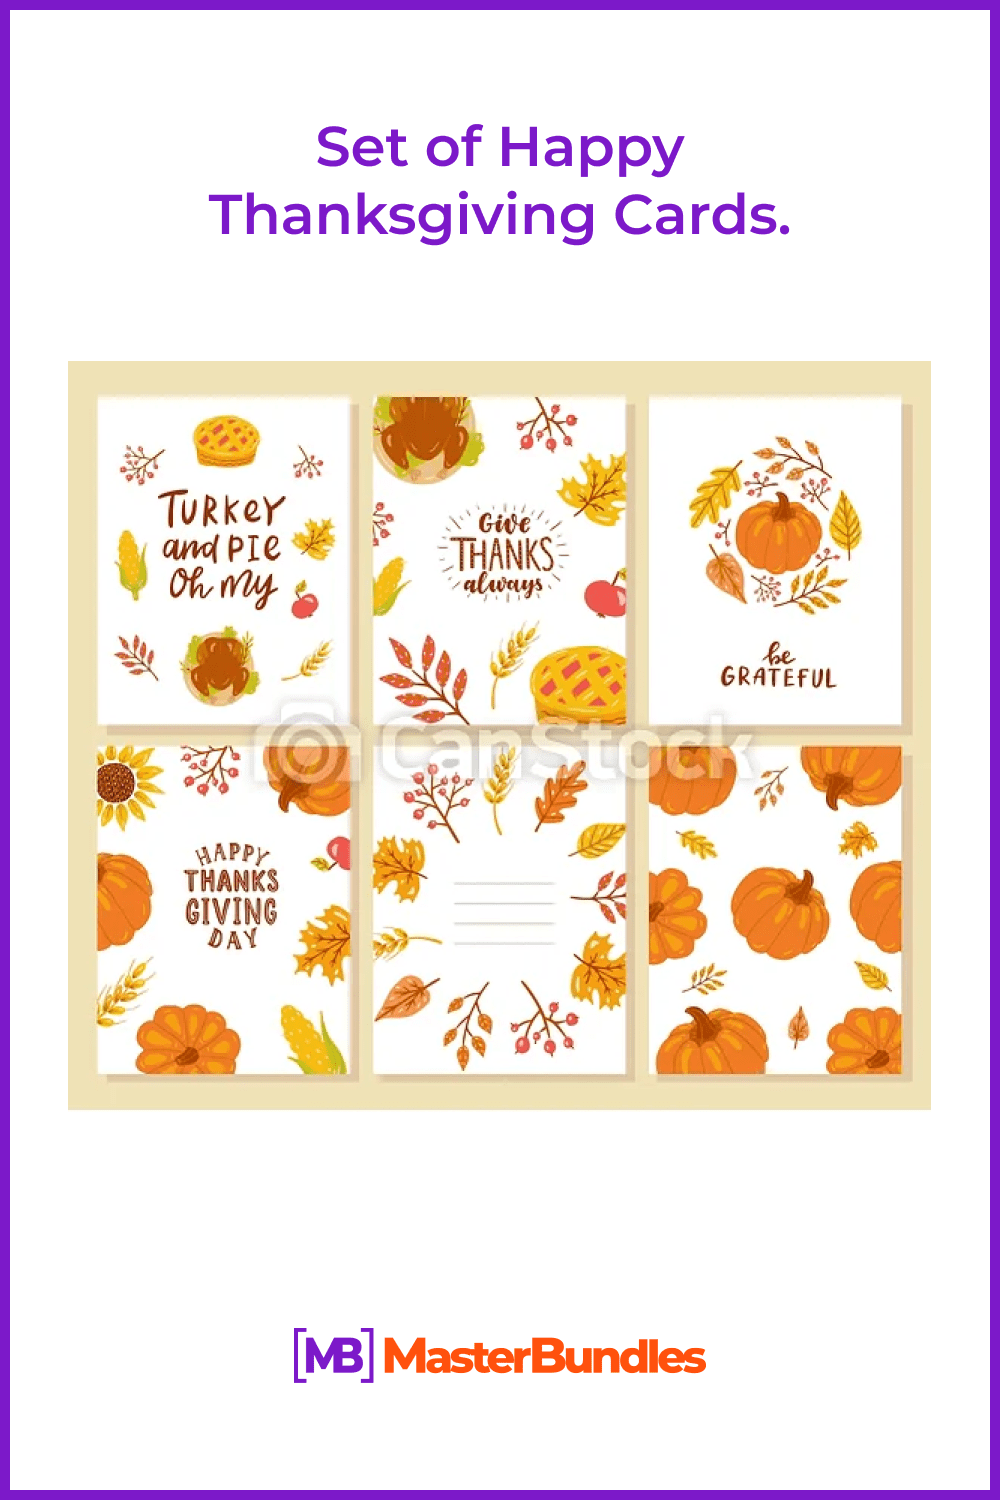 Set of Happy Thanksgiving Cards.